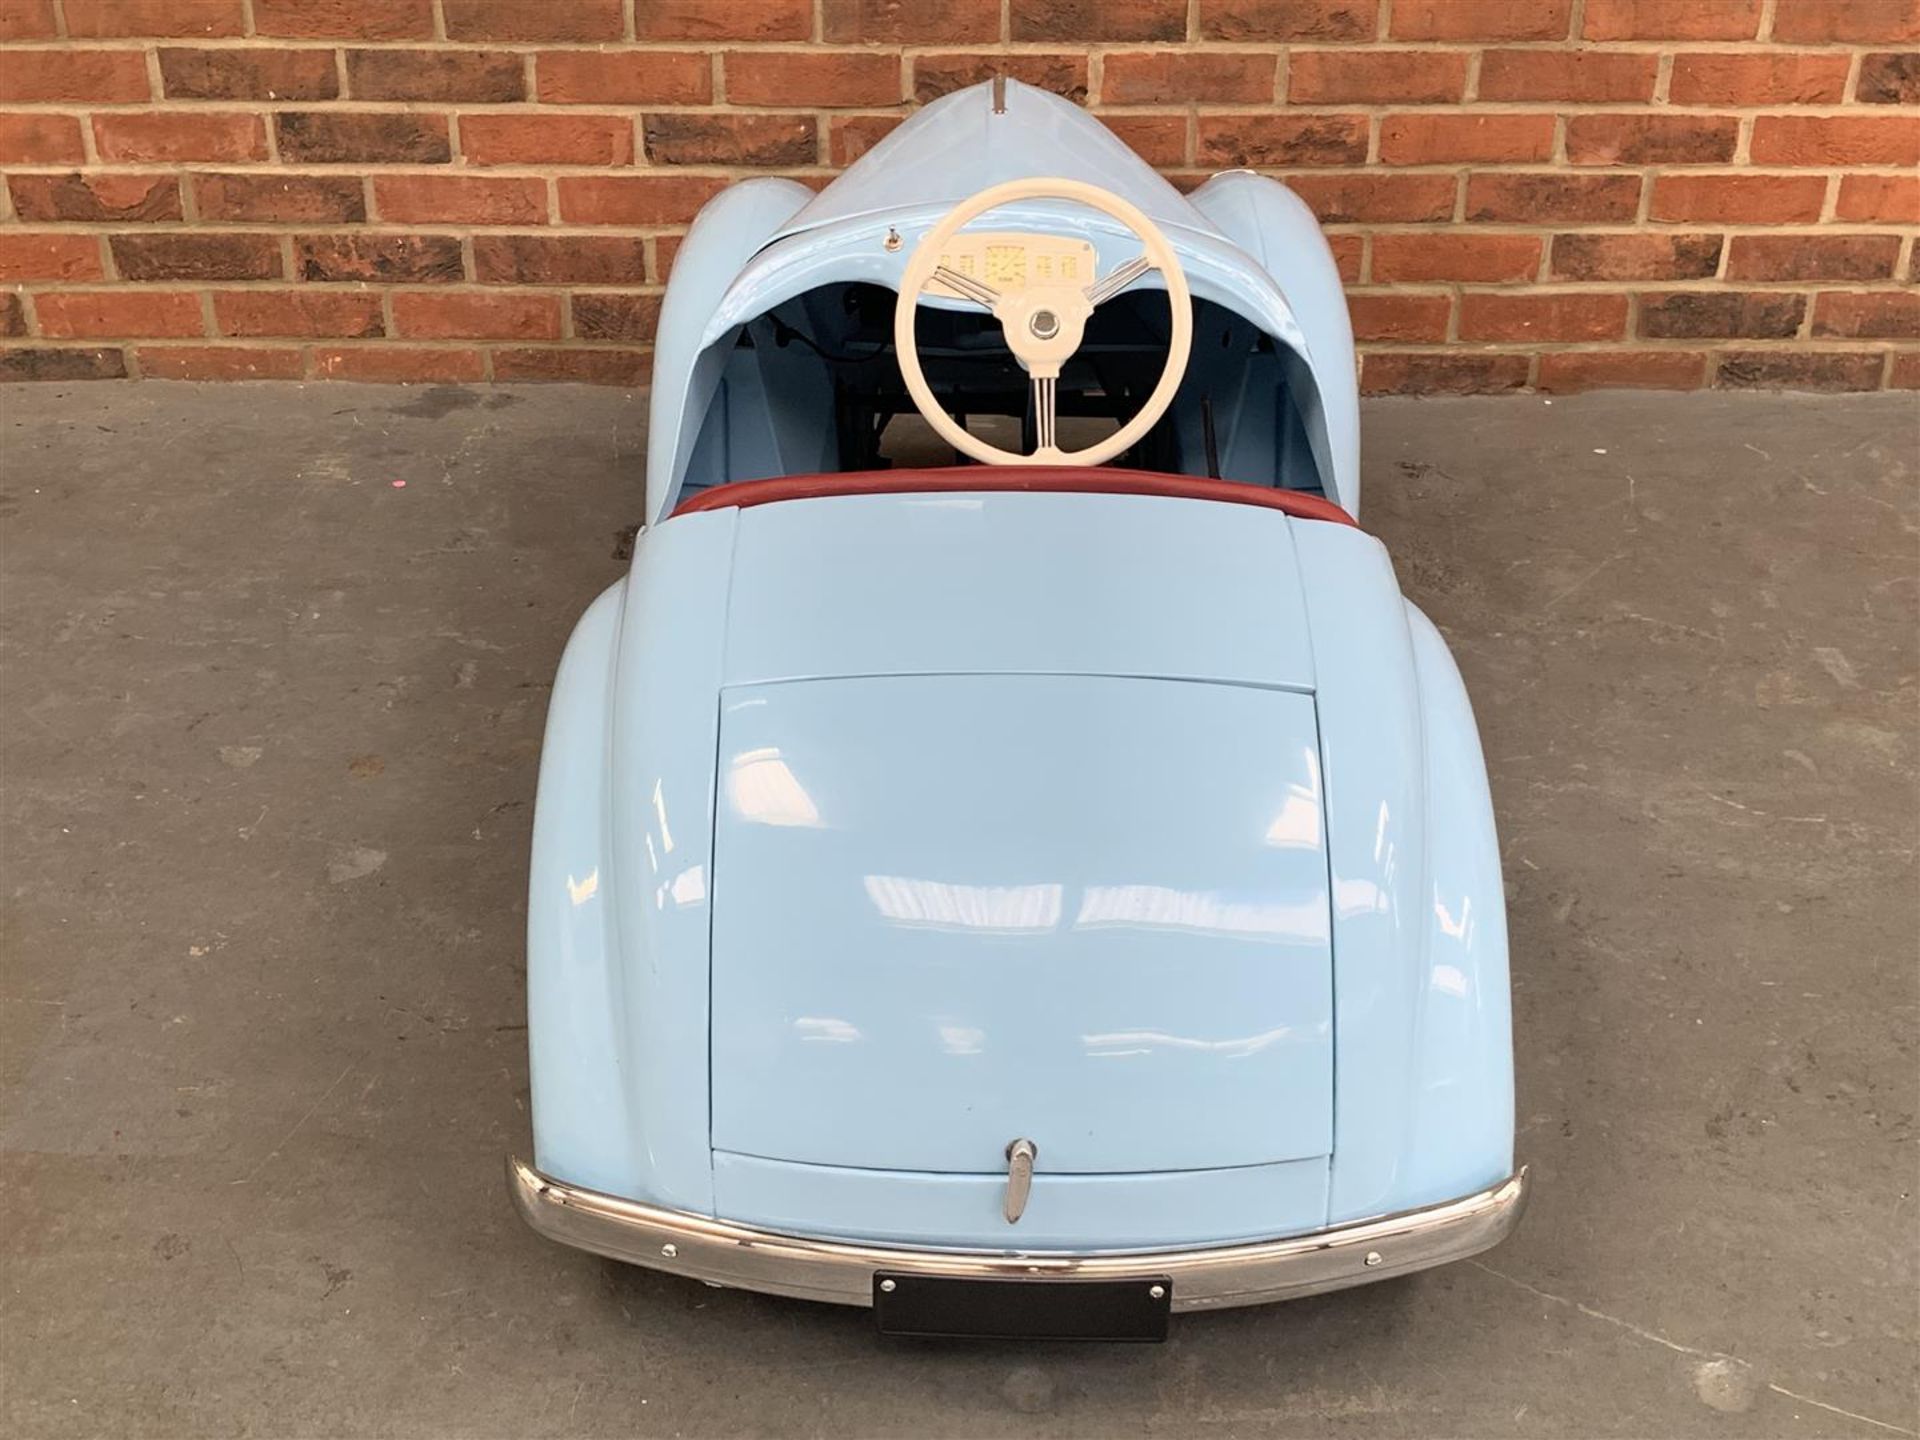 Austin J40 Child's Pedal Car (Fully Restored With Working Lights) - Image 10 of 12